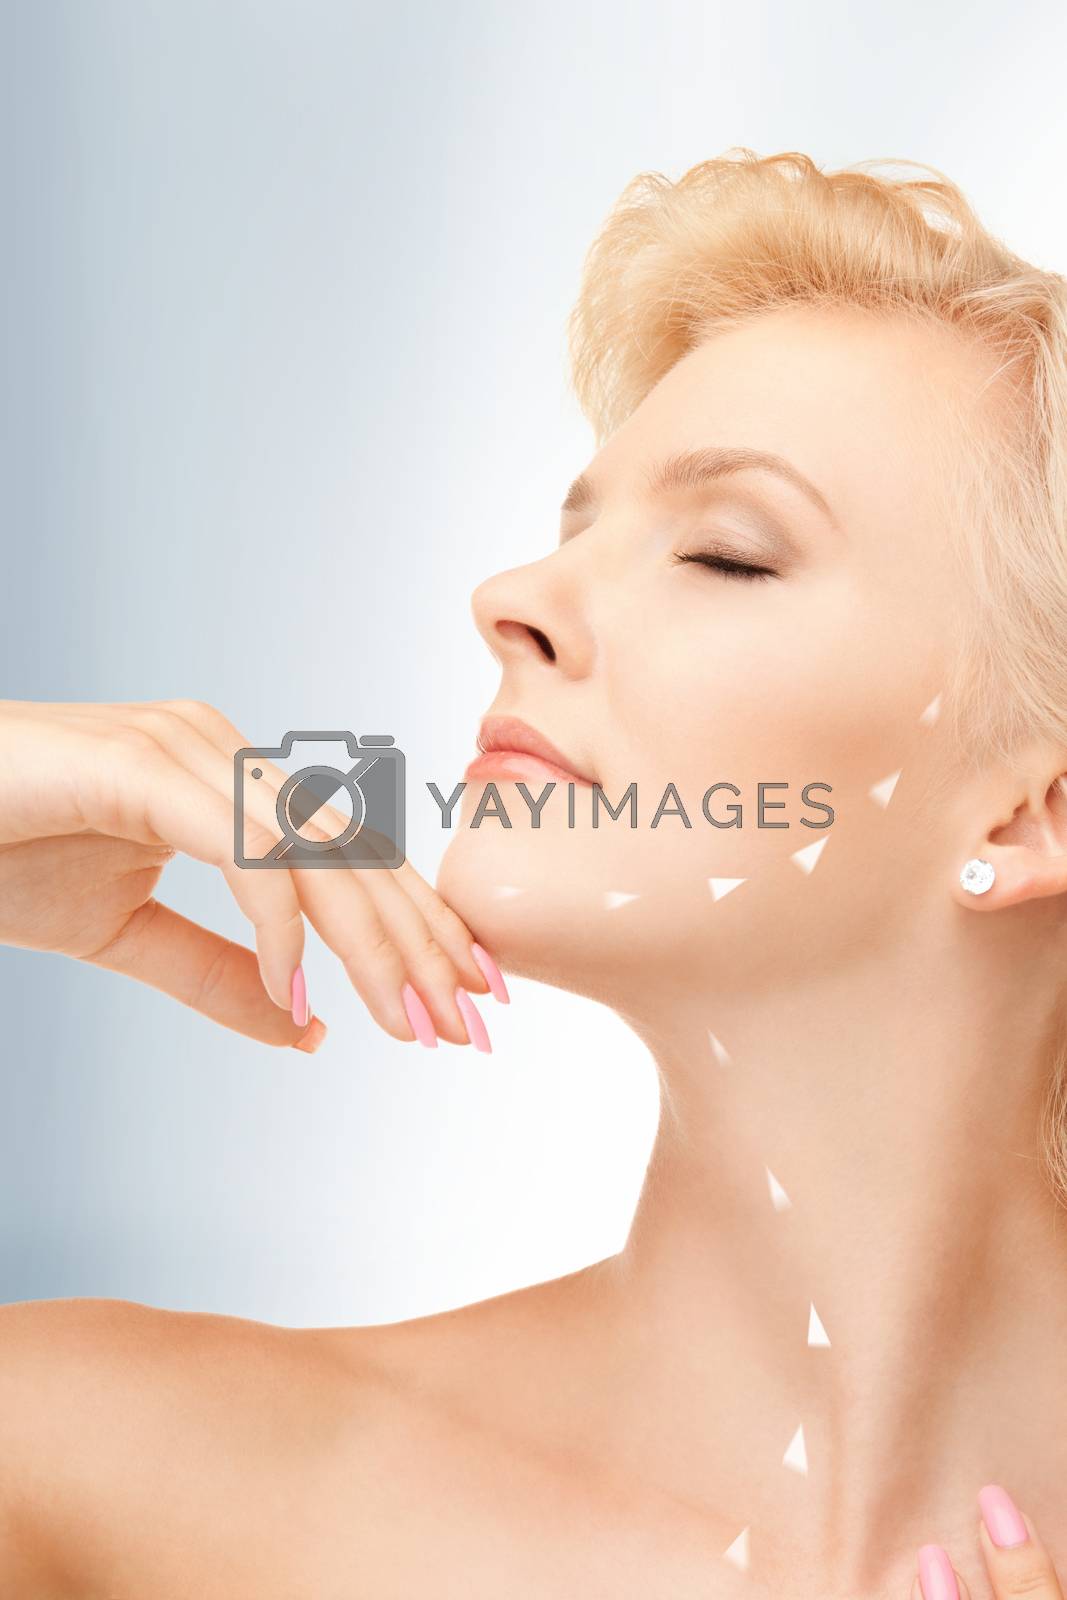 Royalty free image of face and hands of beautiful woman by dolgachov